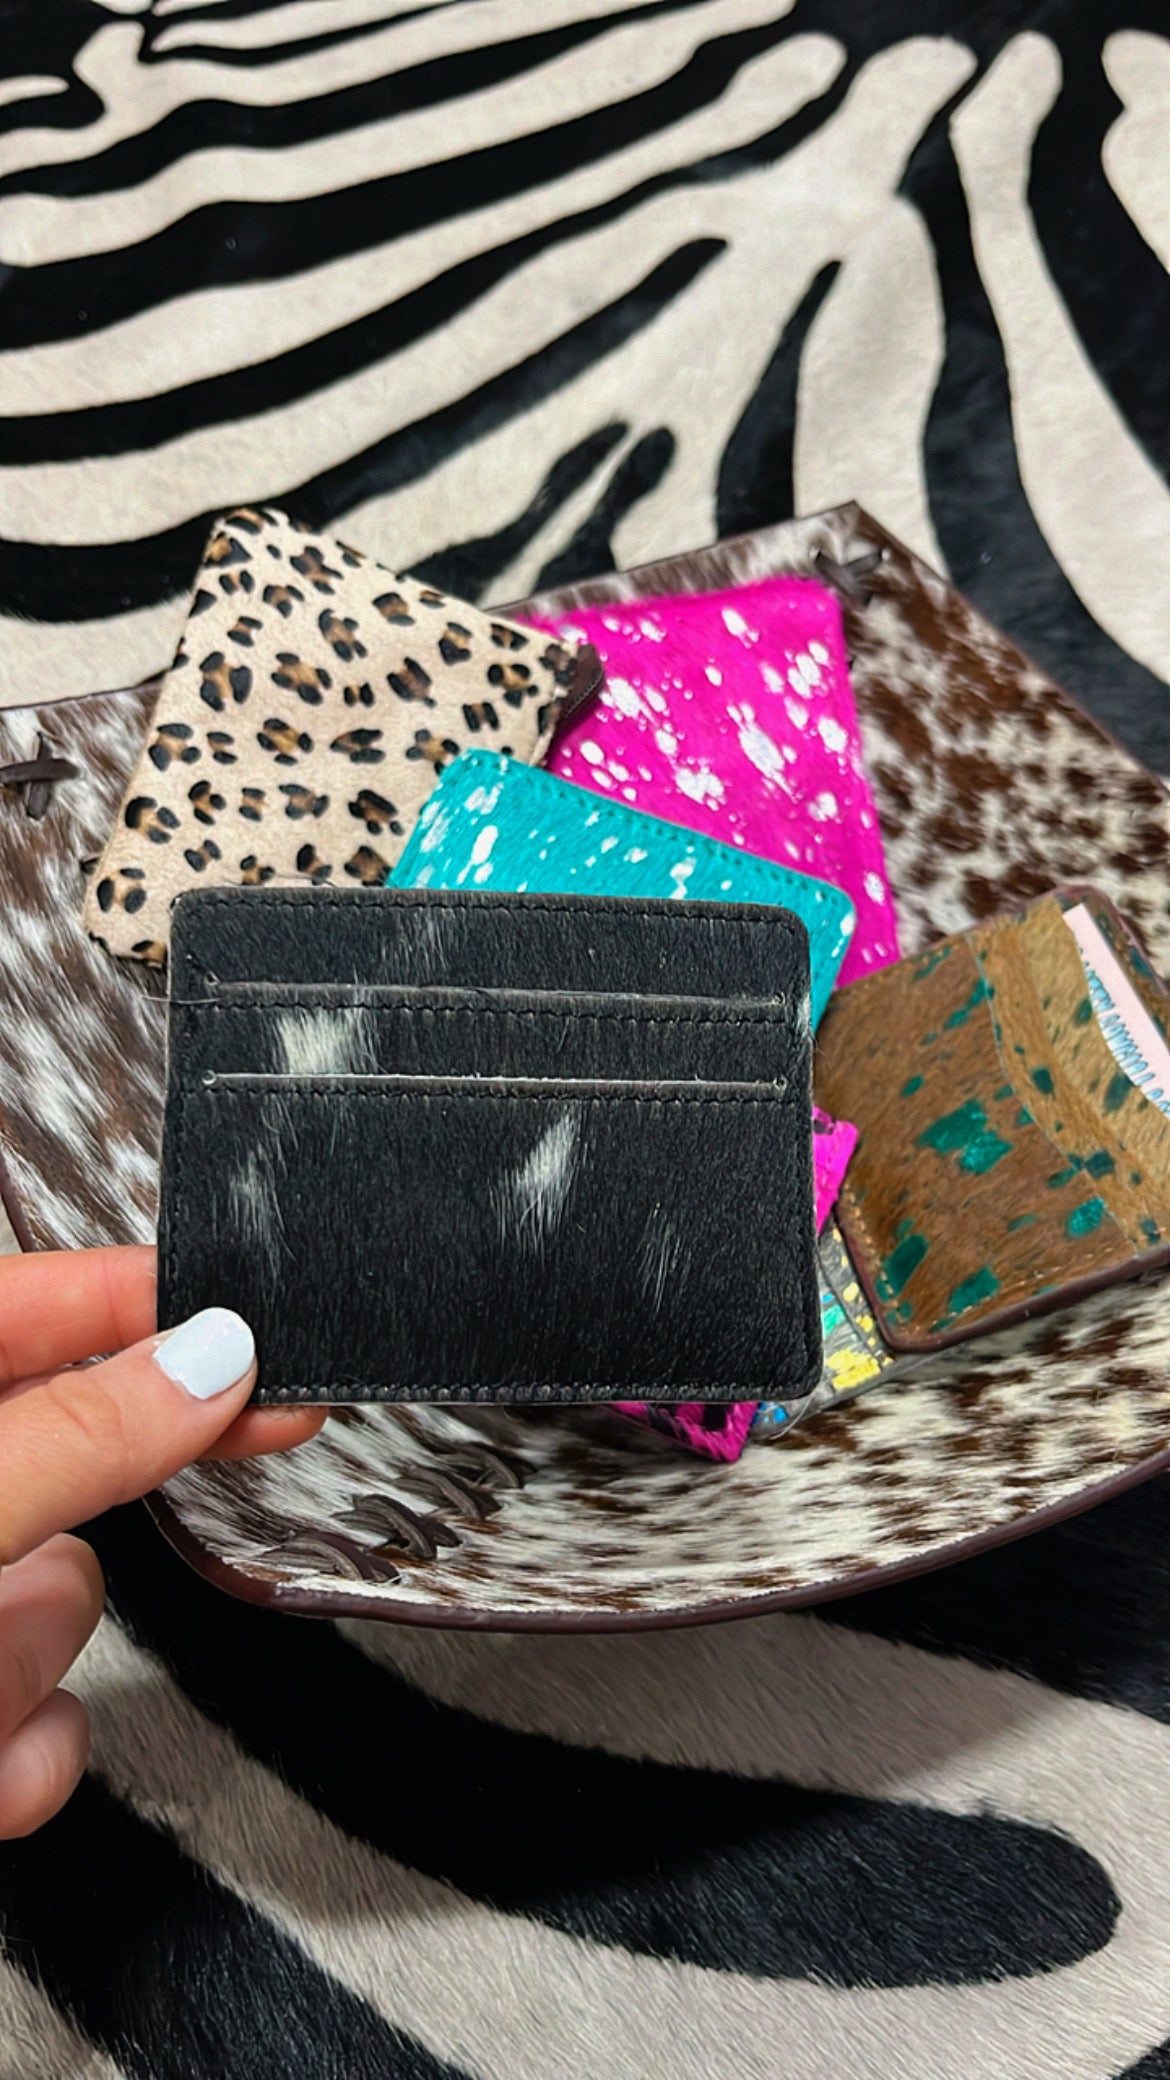 The Hide Card Wallets